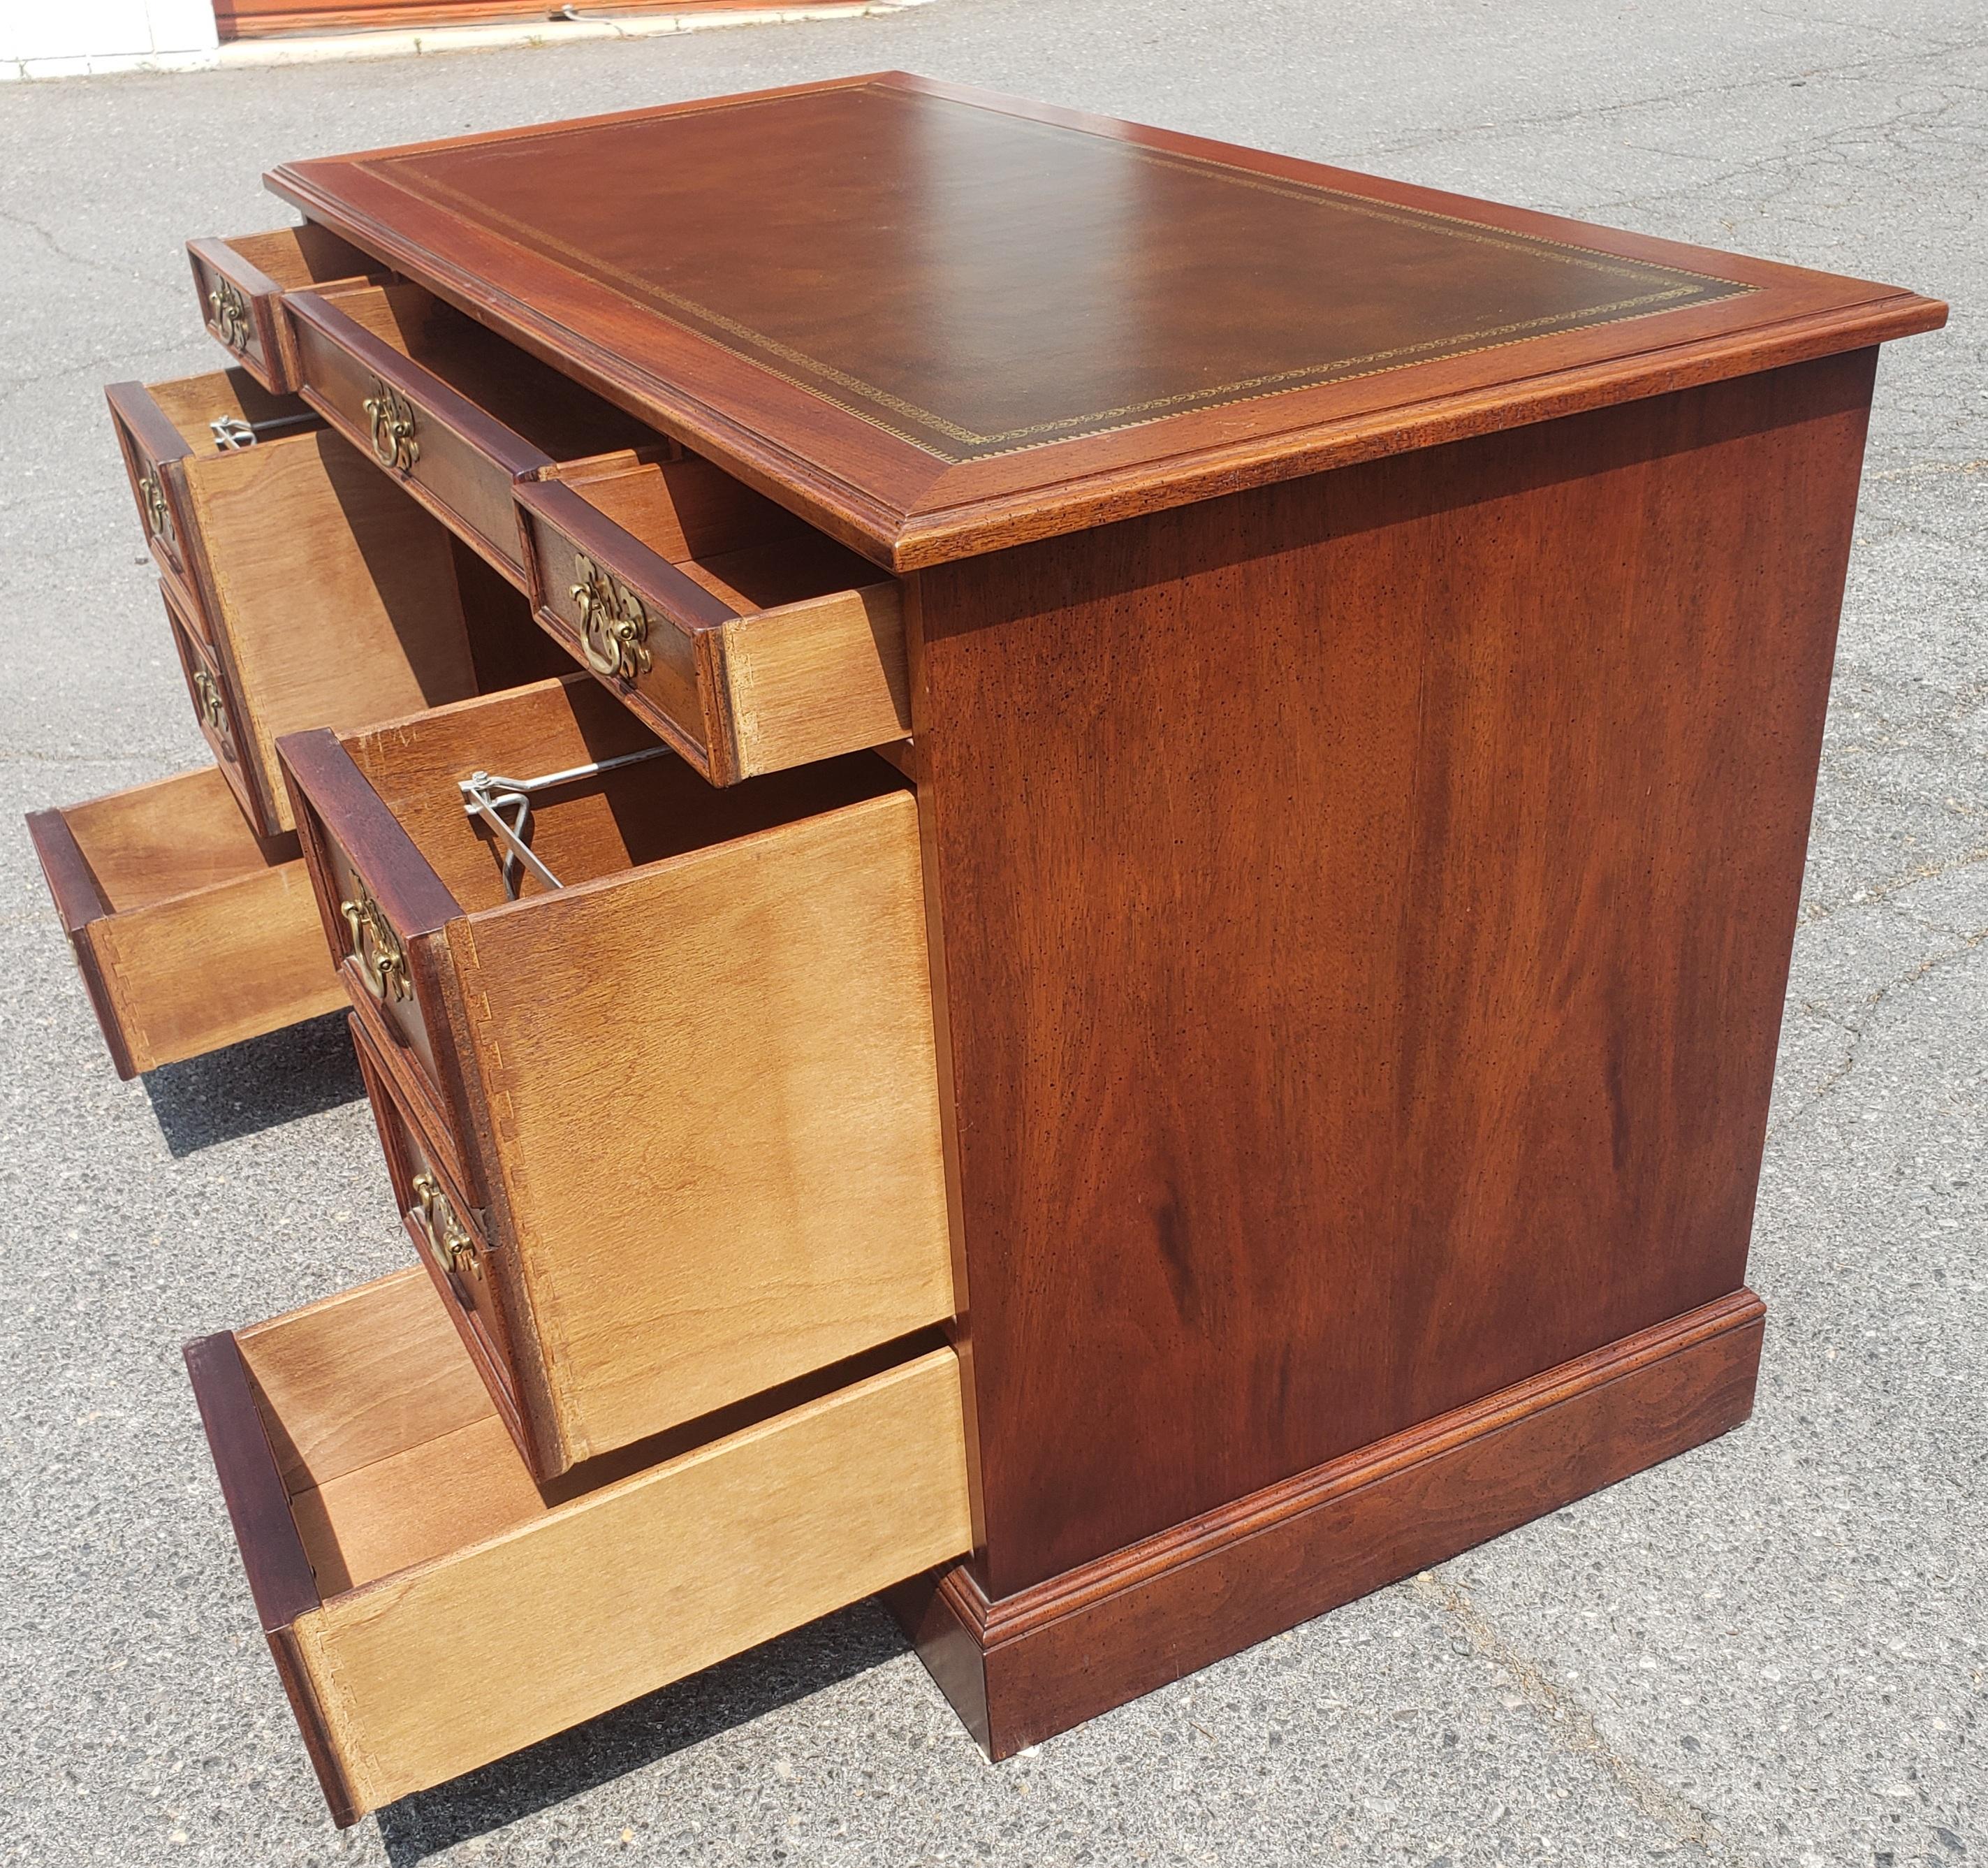 20th Century Sligh Furniture Chippendale Mahogany and Tooled Leather Partners Desk with Glass